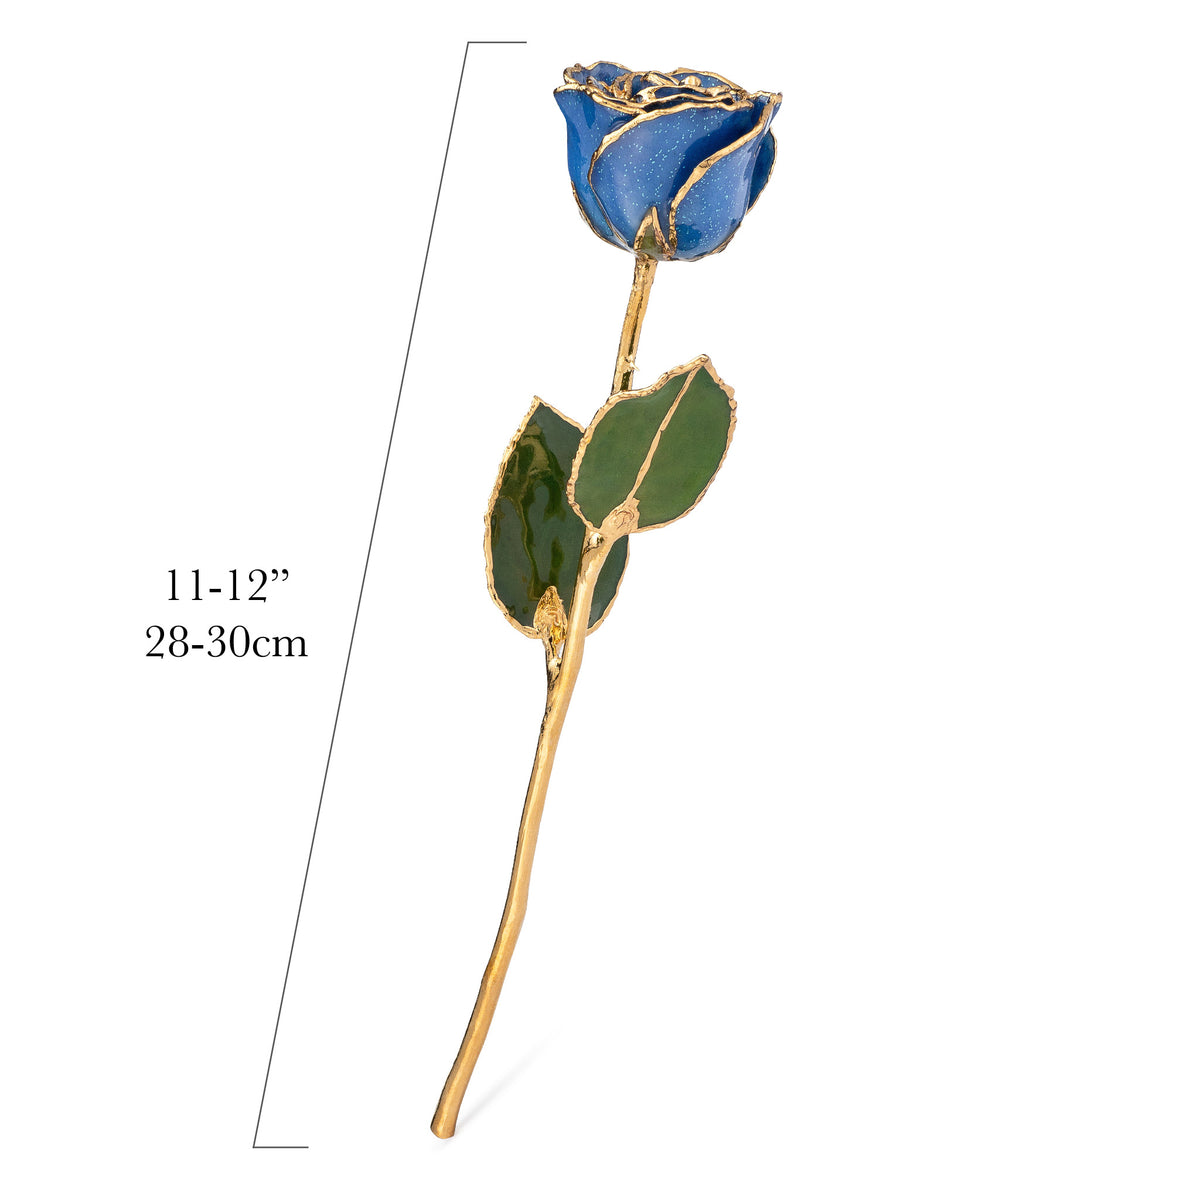 24K Gold Trimmed Forever Rose with Sapphire Blue Petals with Sapphire Suspended Sparkles. View of Stem, Leaves, and Rose Petals and Showing Detail of Gold Trim with measurements of rose